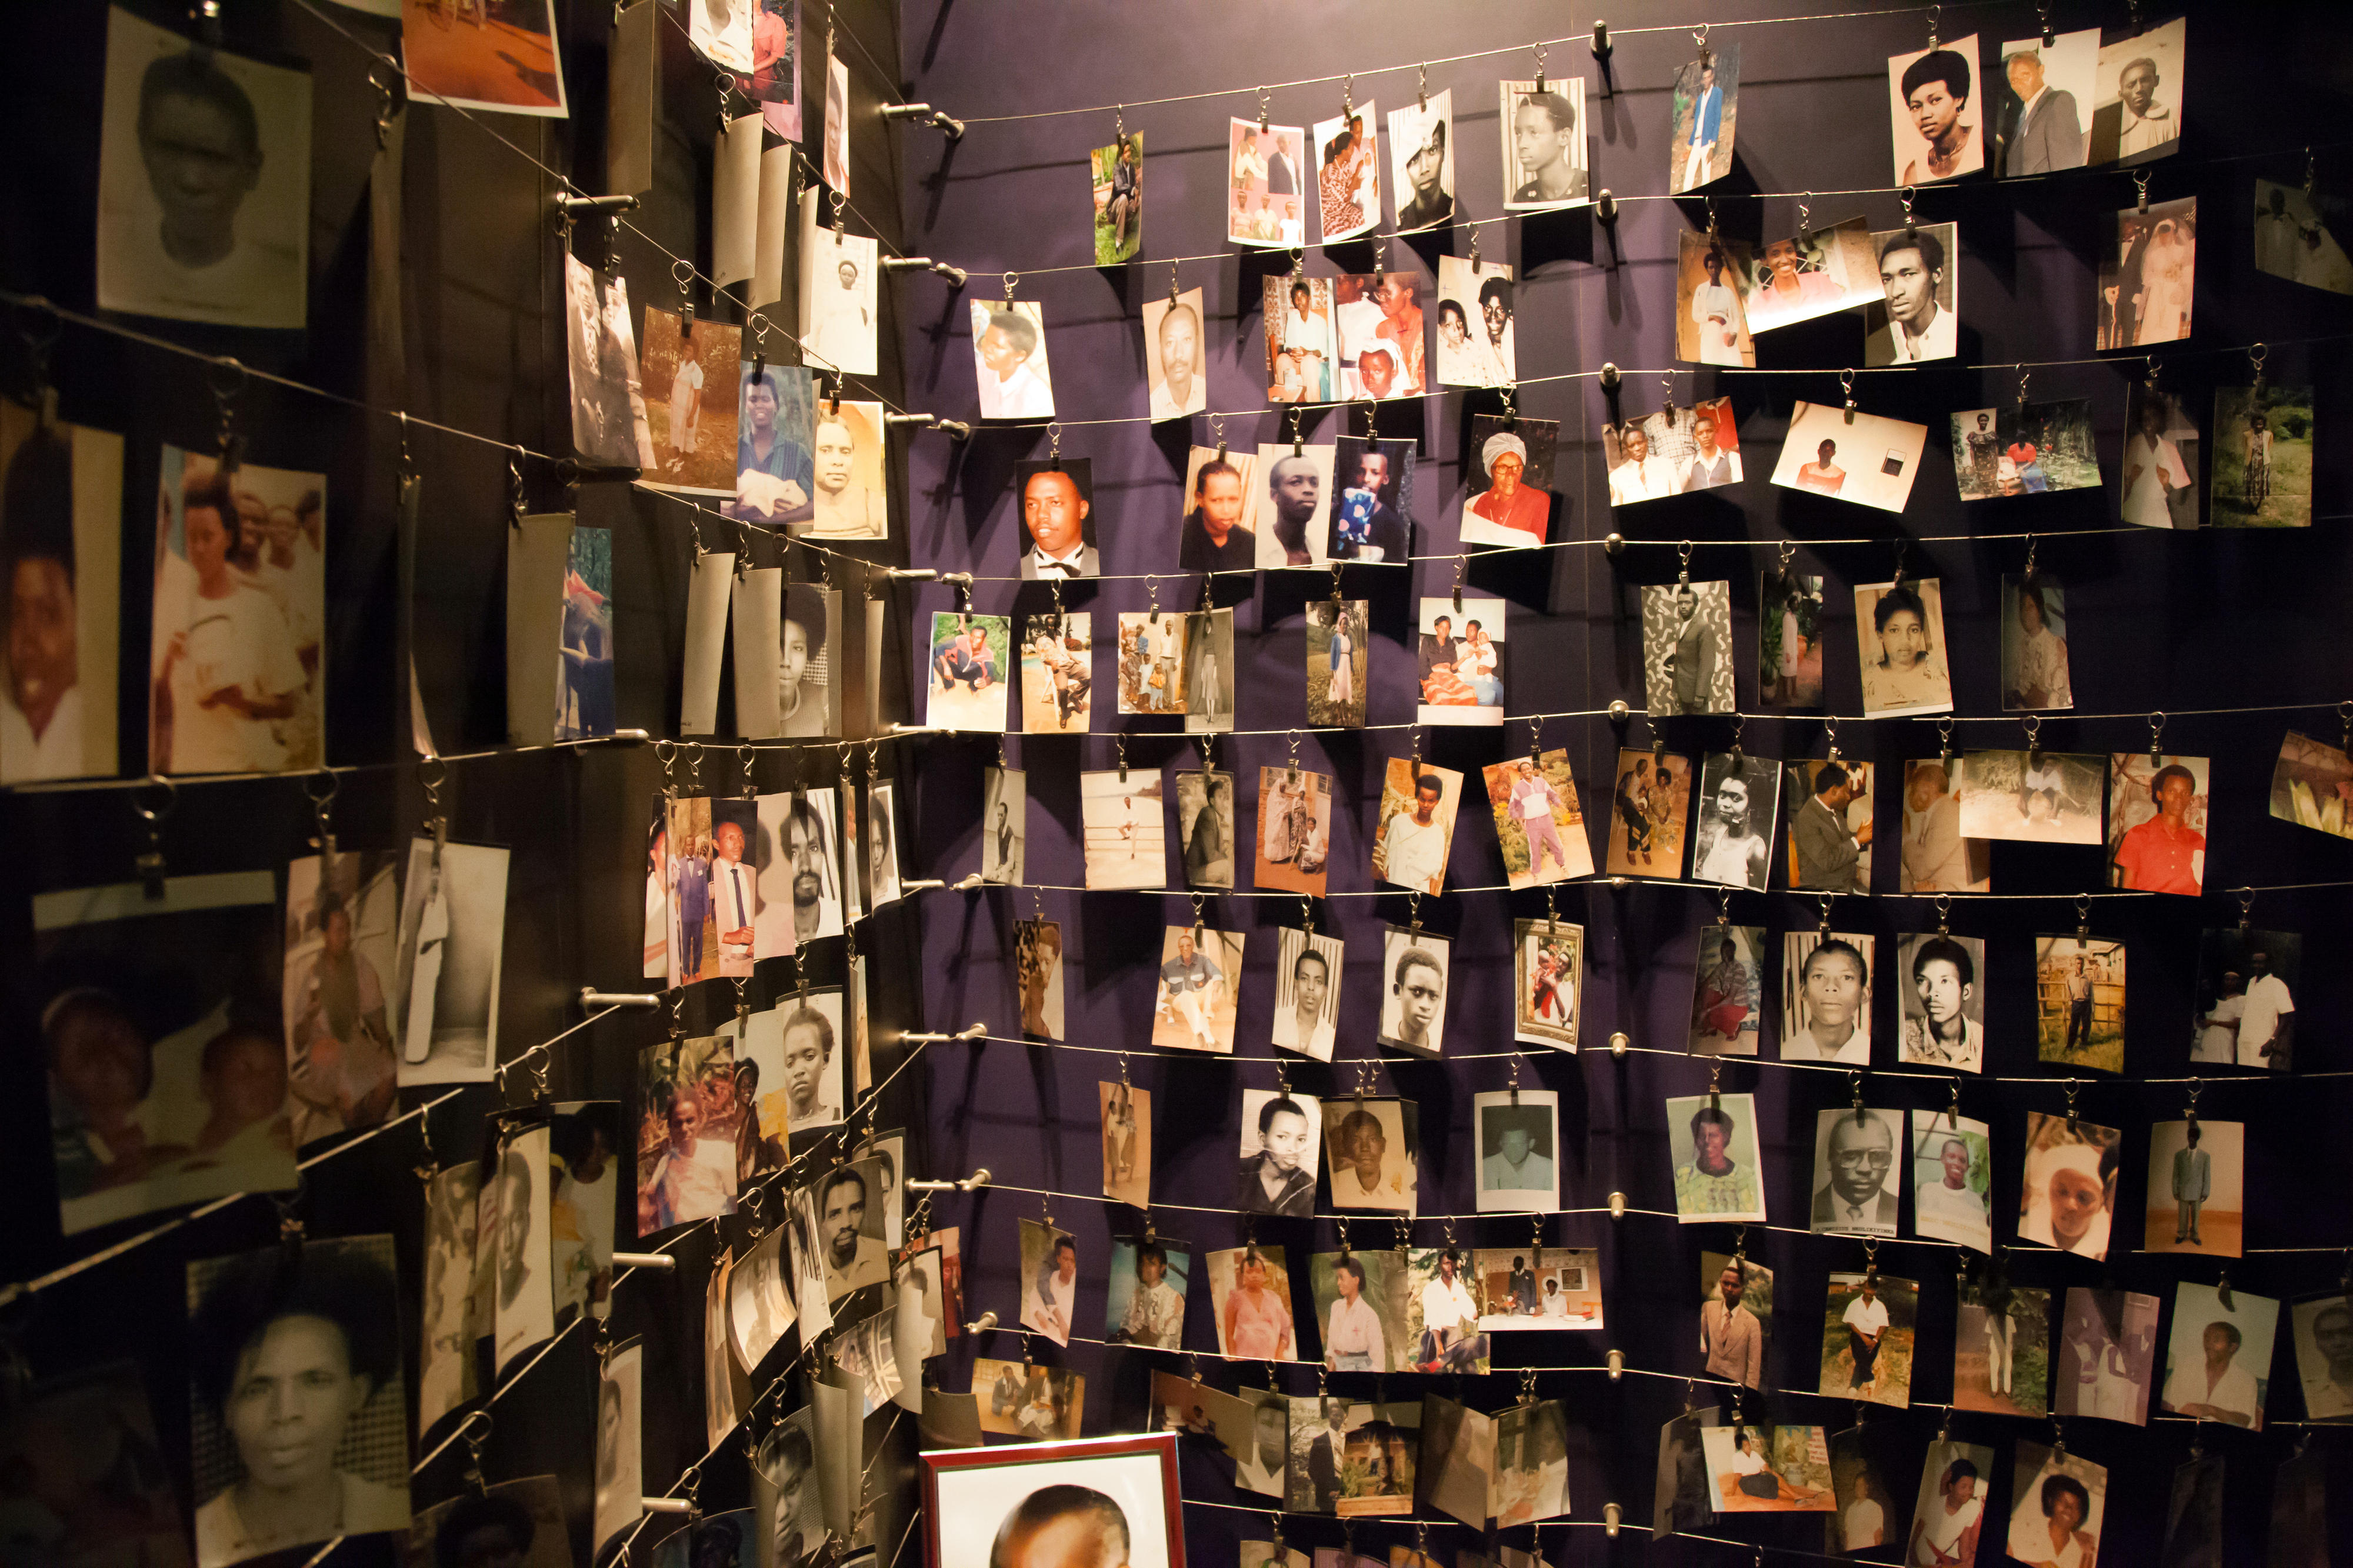 Photographs of victims of the genocide at the Kigali Genocide Memorial Centre. The photos were provided by surviving family members who want to remember their loved ones.